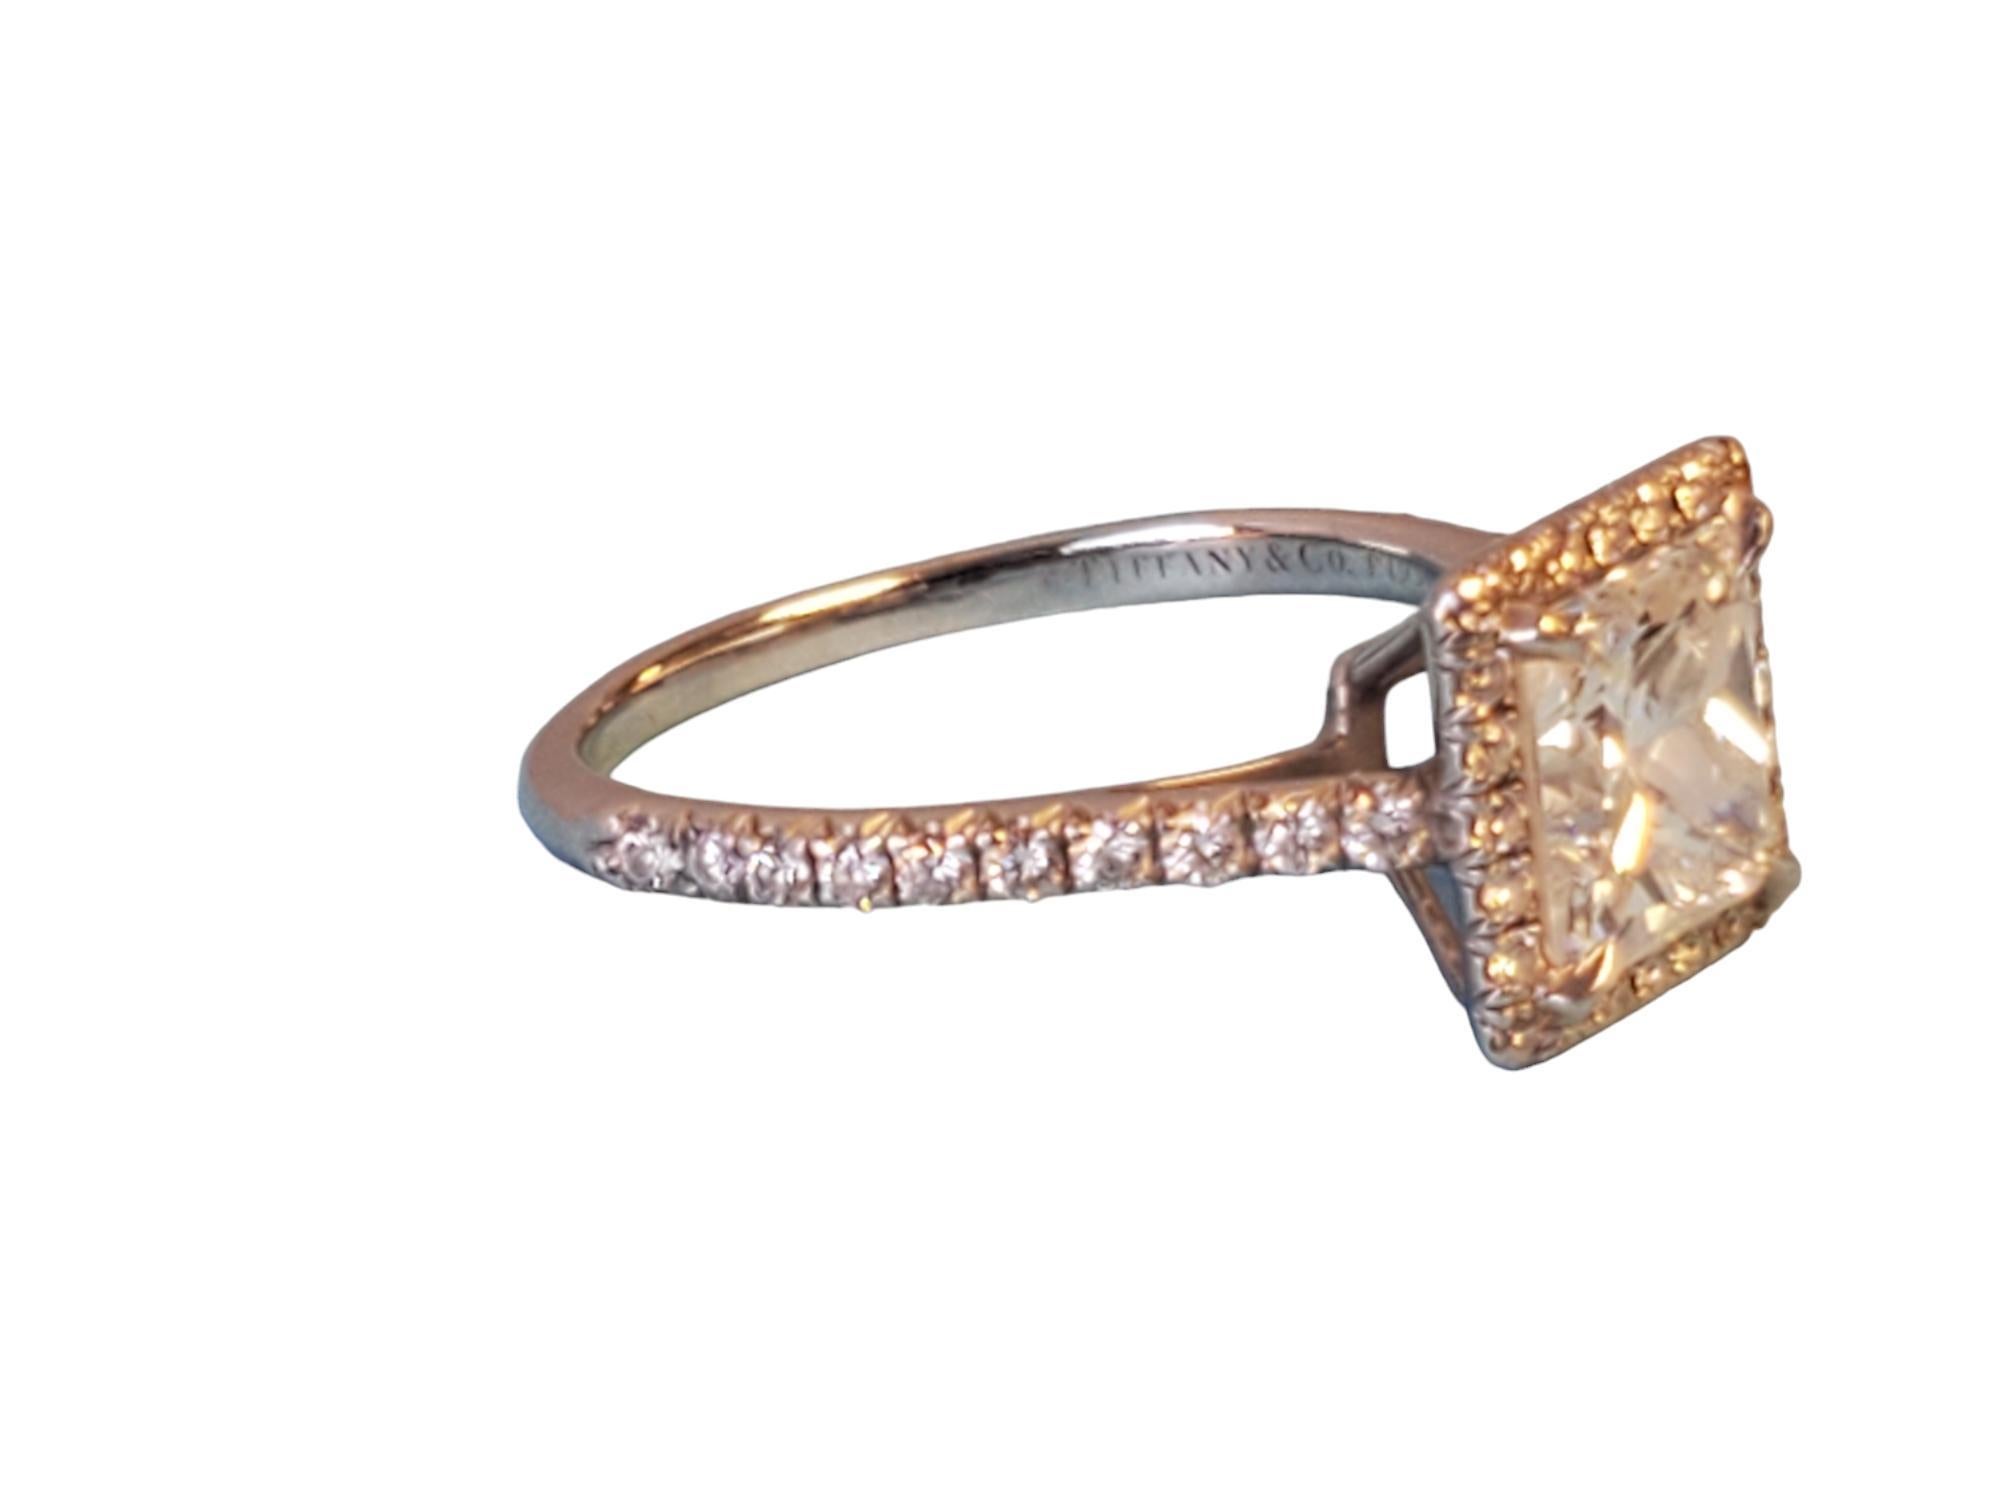 Tiffany & Co. Soleste 1.81tcw Princess Cut Platinum Diamond Ring In Good Condition For Sale In Overland Park, KS